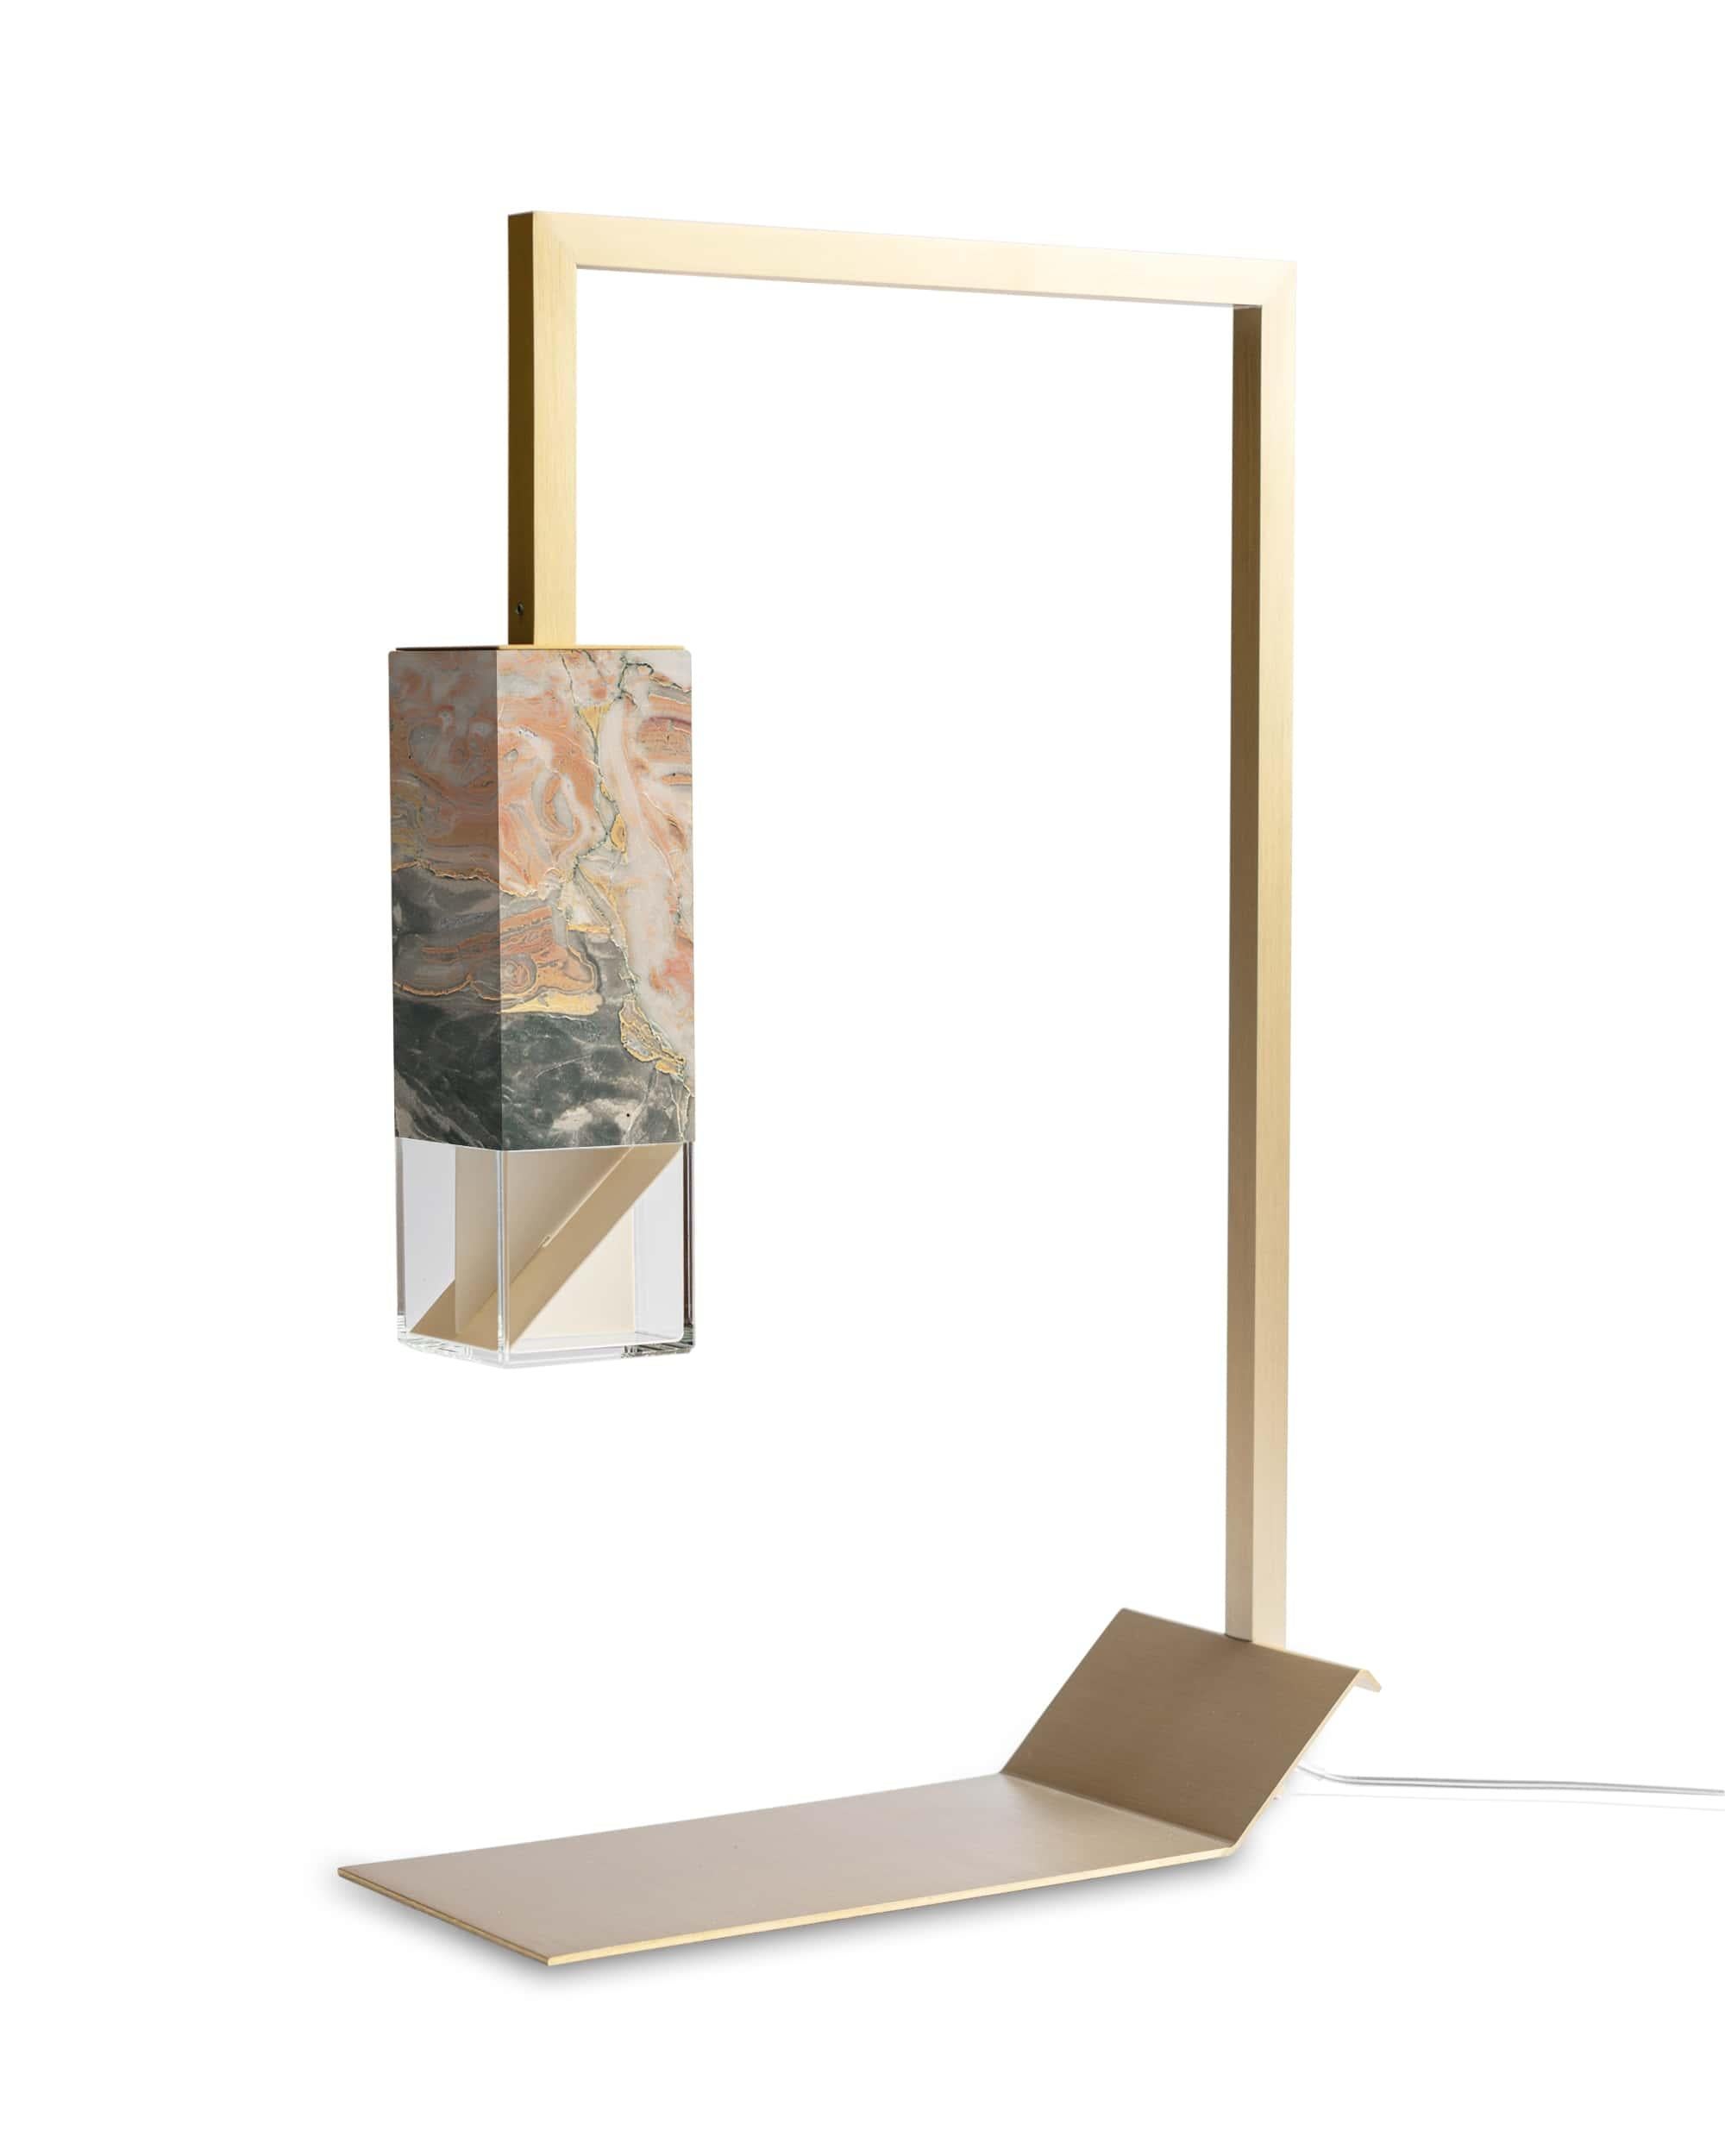 Marble table lamp two 02 revamp edition by Formaminima
Limited Edition of 250 pieces. Numbered and signed with certificate of authenticity.
Dimensions: W 10 x D 25 x H 40 cm.
Materials: “Arabescato Orobico” Italian marble, crystal shade,